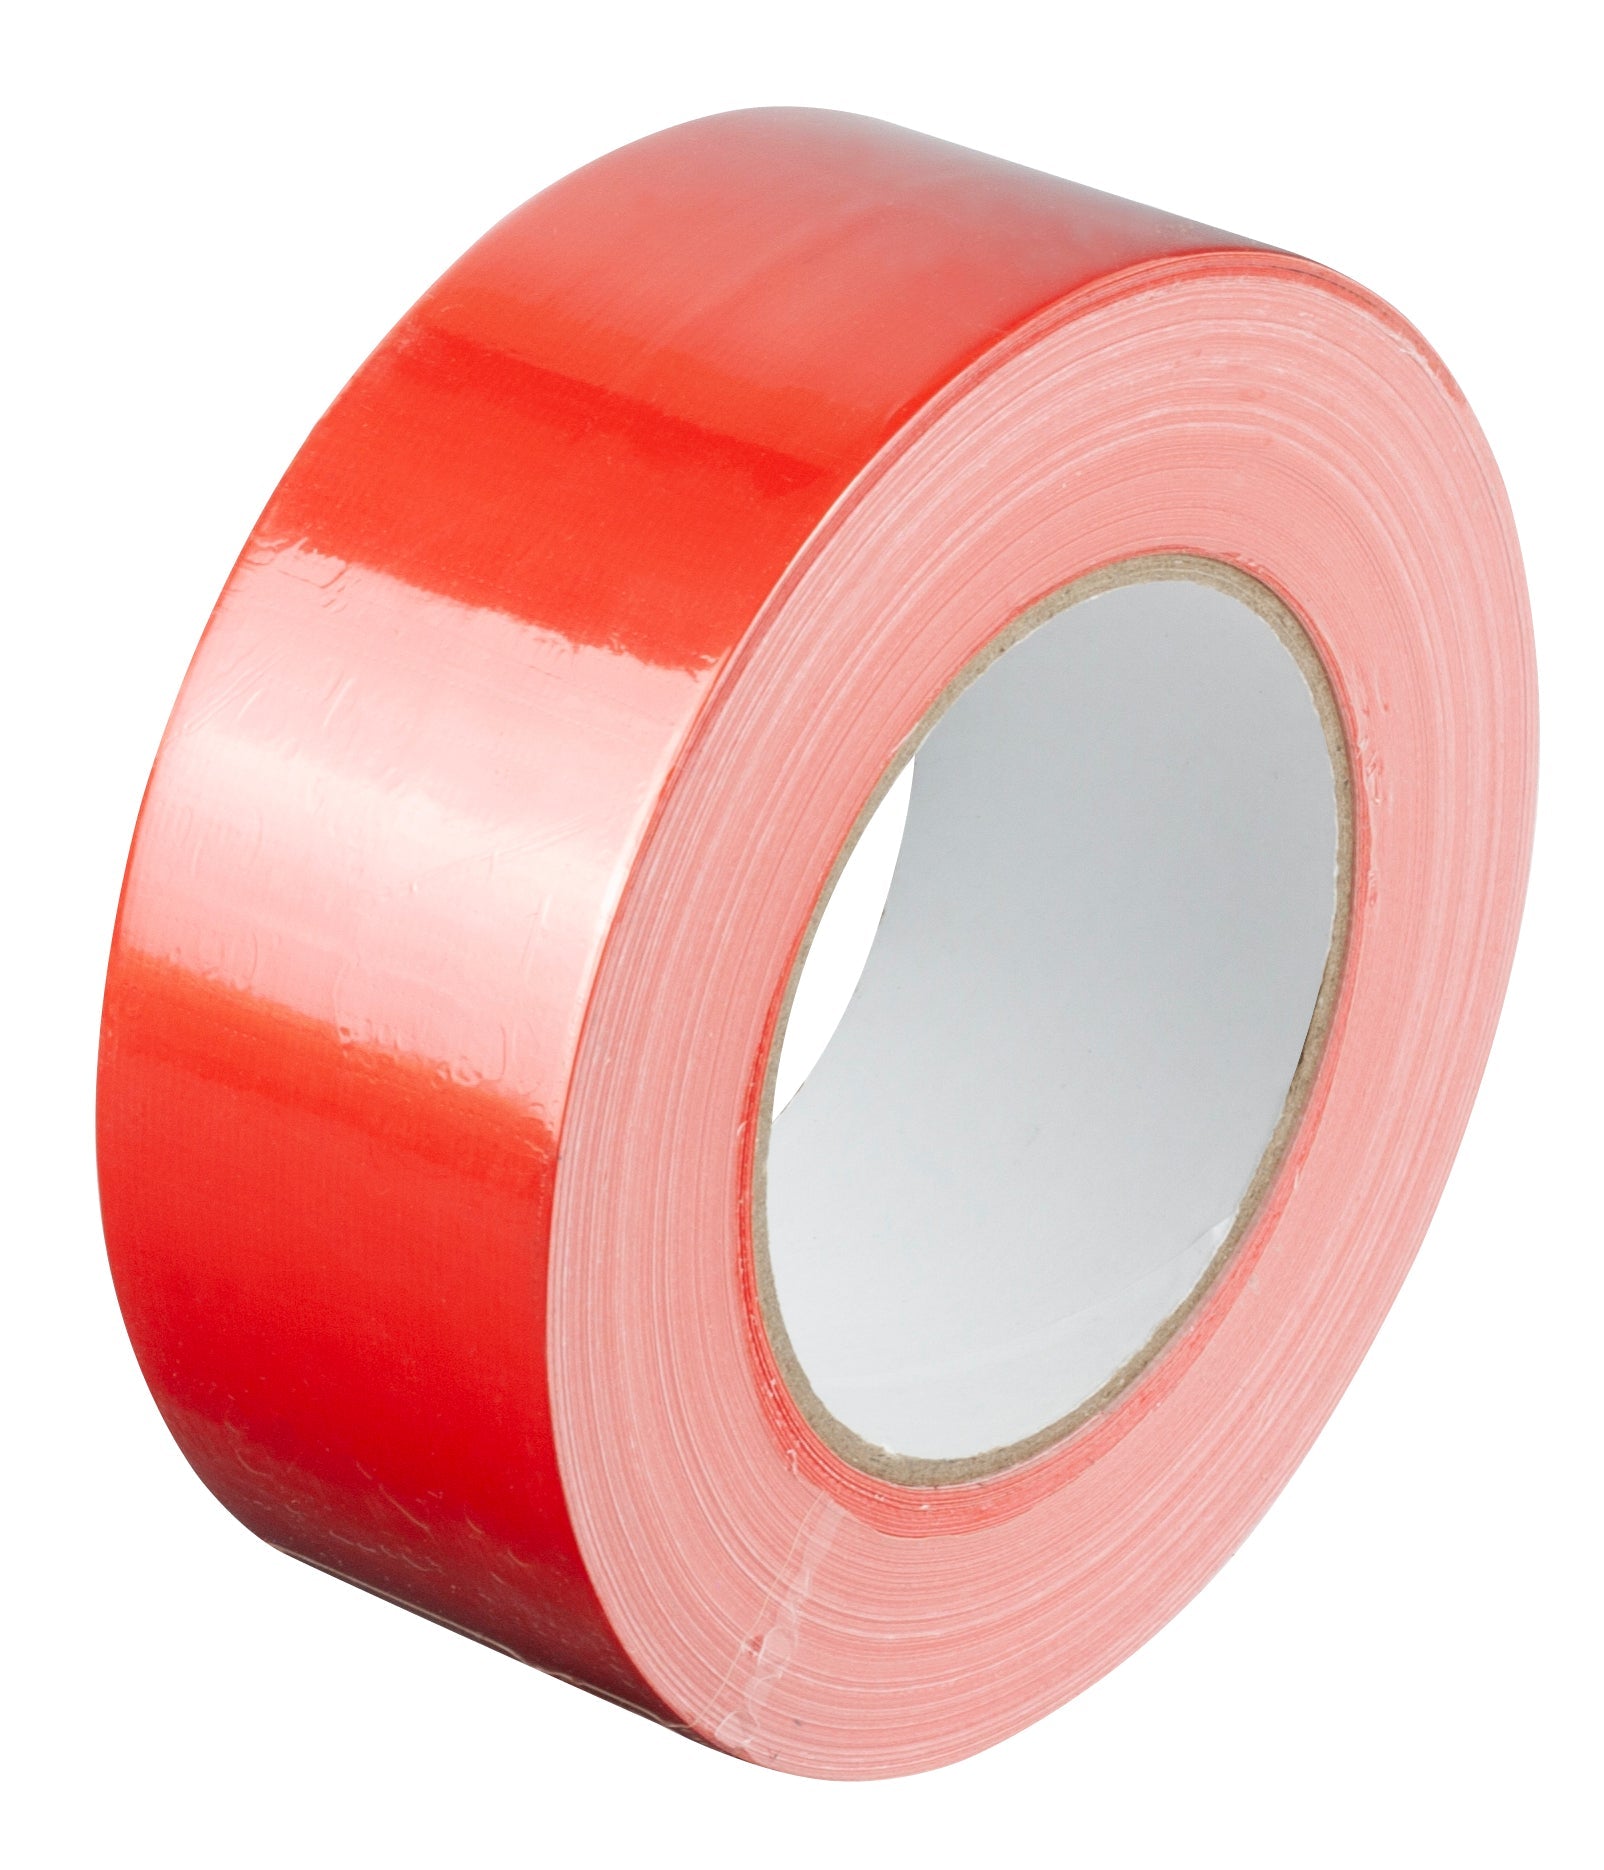 Heavy Duty Red Gaffer/Duct Tape 50mm x 50m  - Per 1 Roll